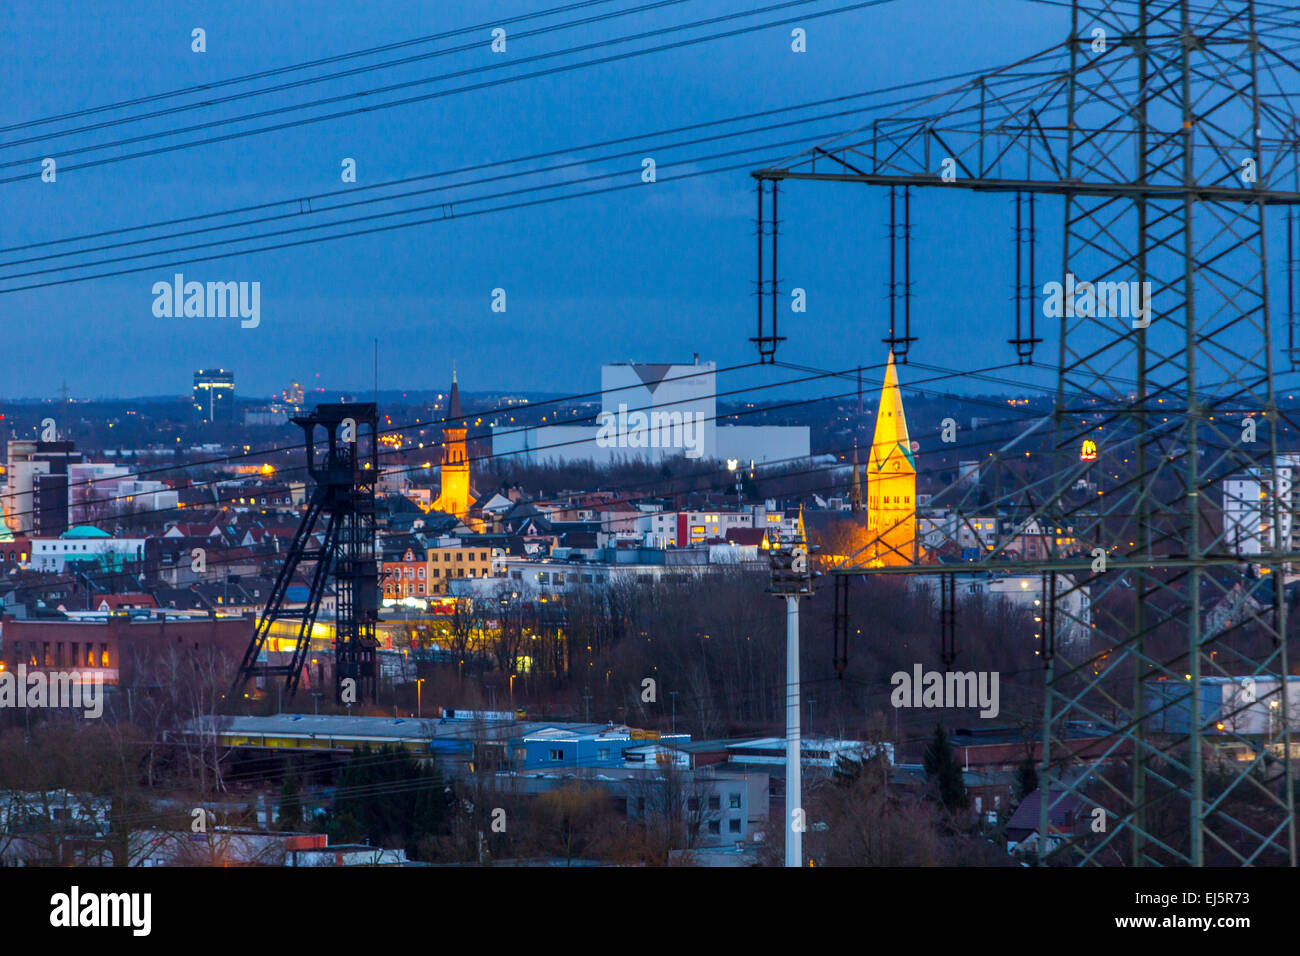 Nightly overview of Bochum-Wattenscheid, Germany, old coal mine shaft an Thysse steelworks (back) Stock Photo